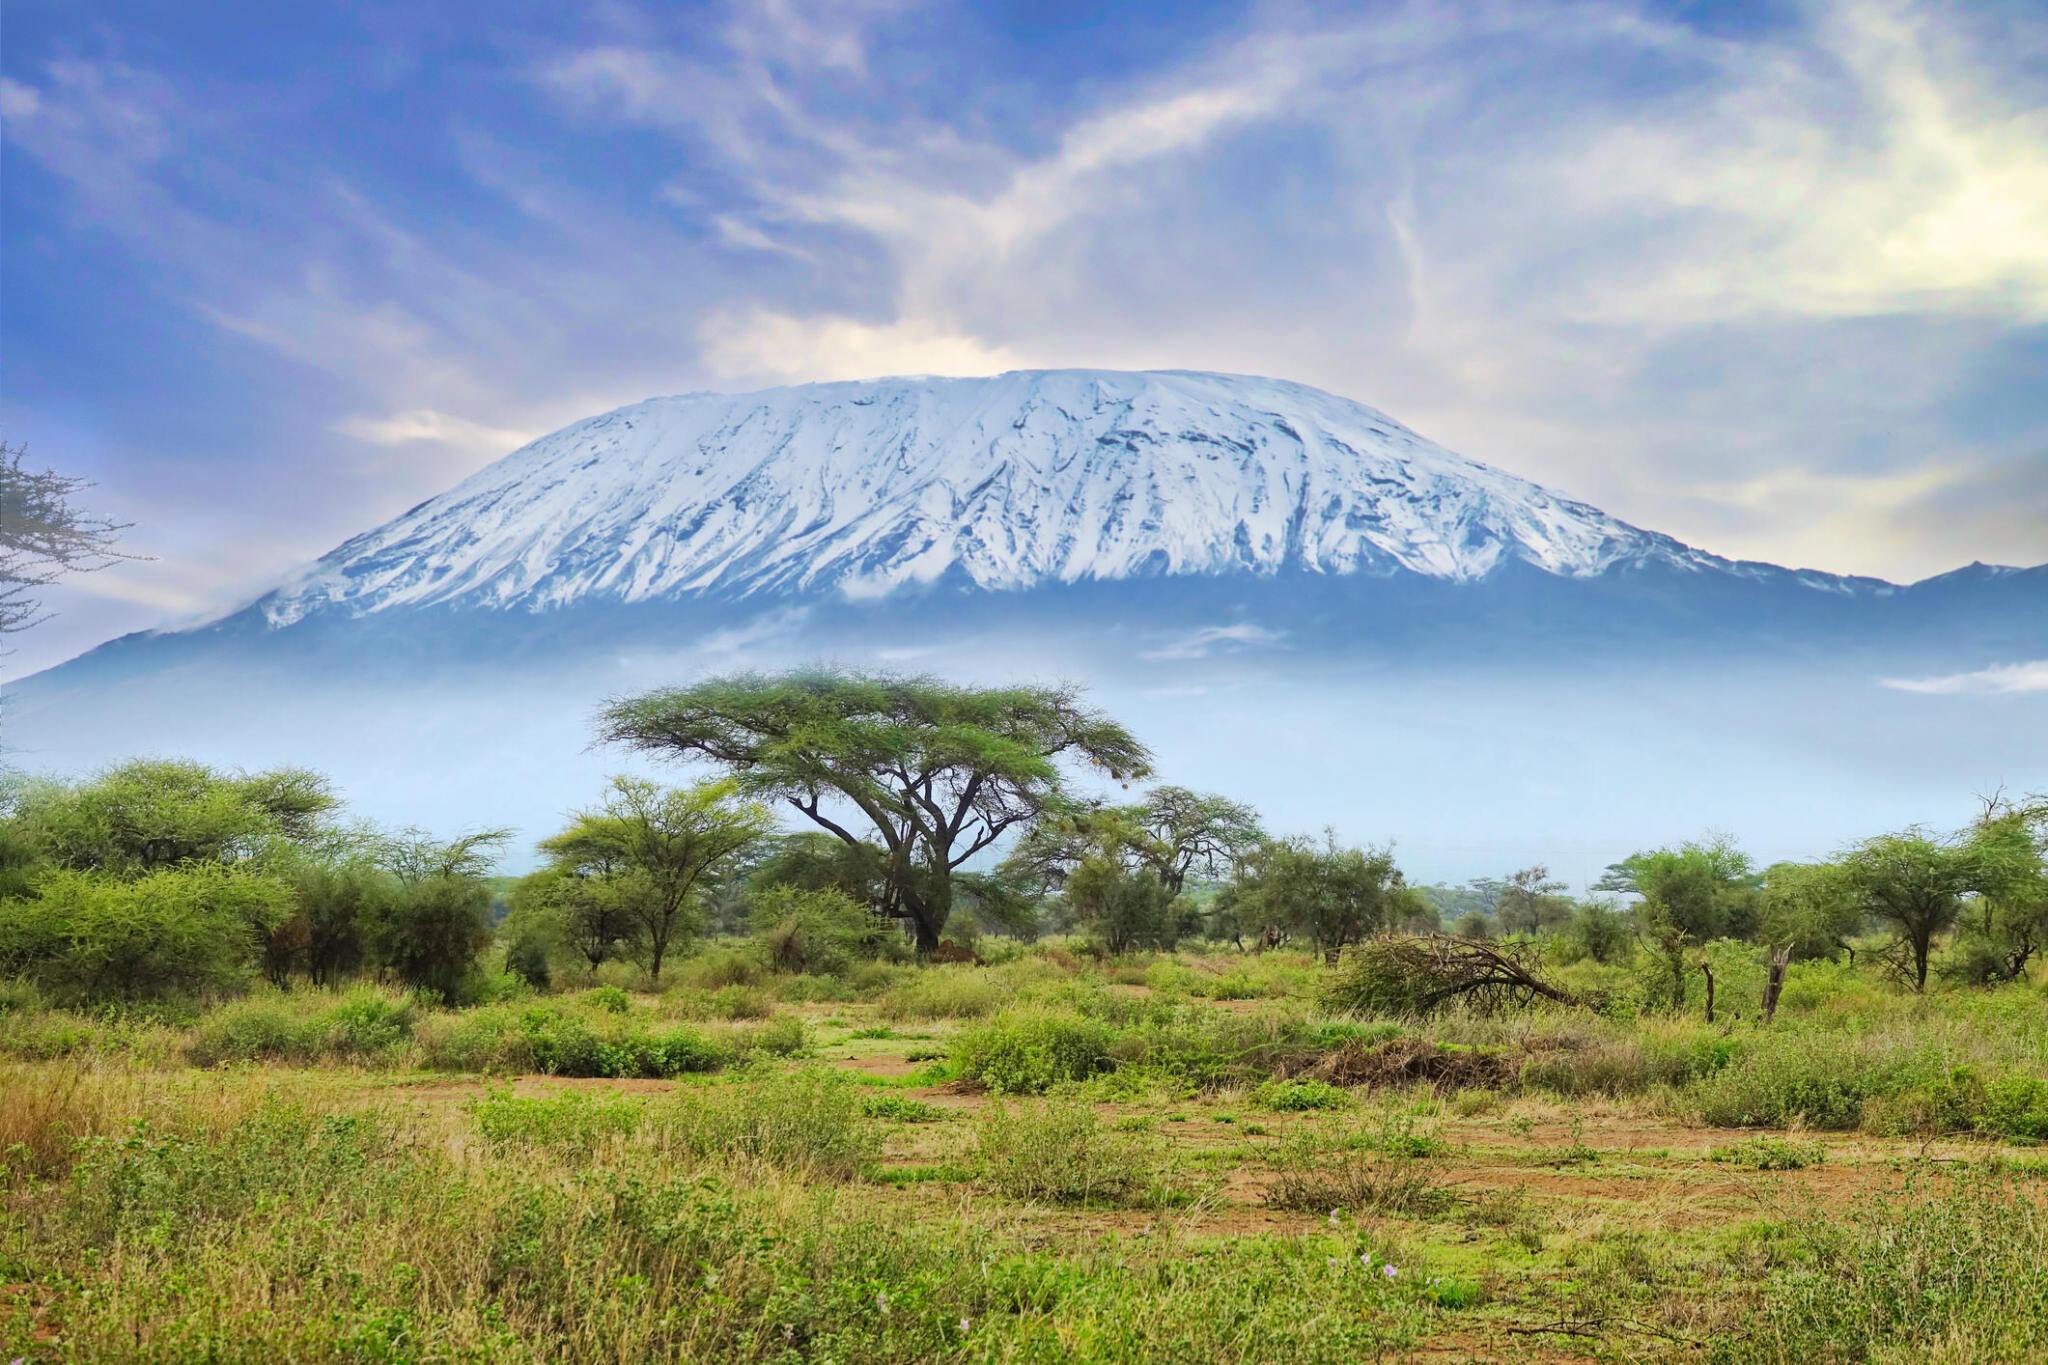 Do You Want to Explore the Natural Wonders of Kenya? Here are Few Tips